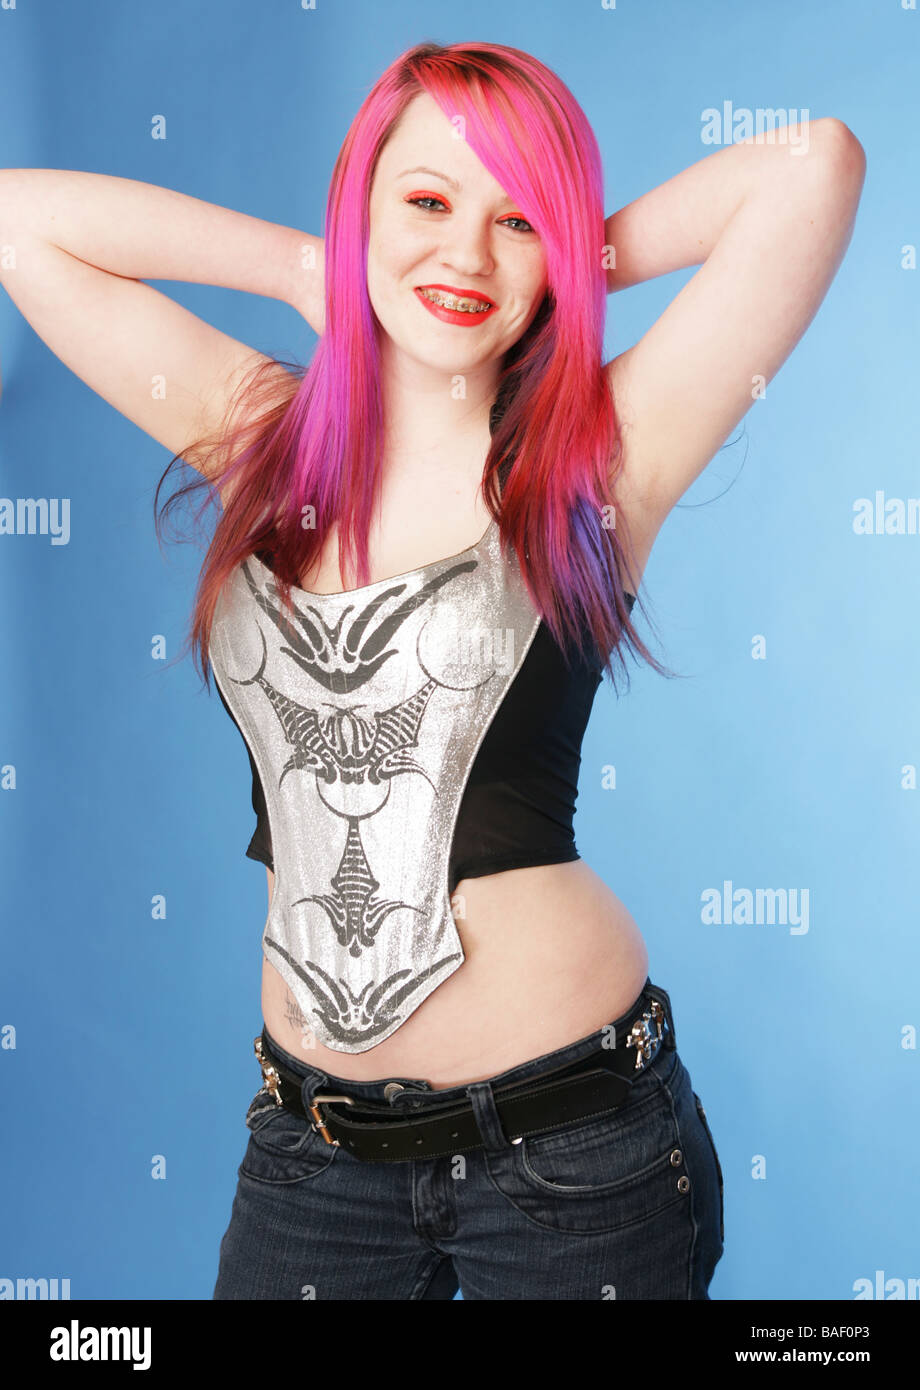 Young teen with bright pink hair red lips and pale skin smiling ,standing holding her hands behind her head Stock Photo